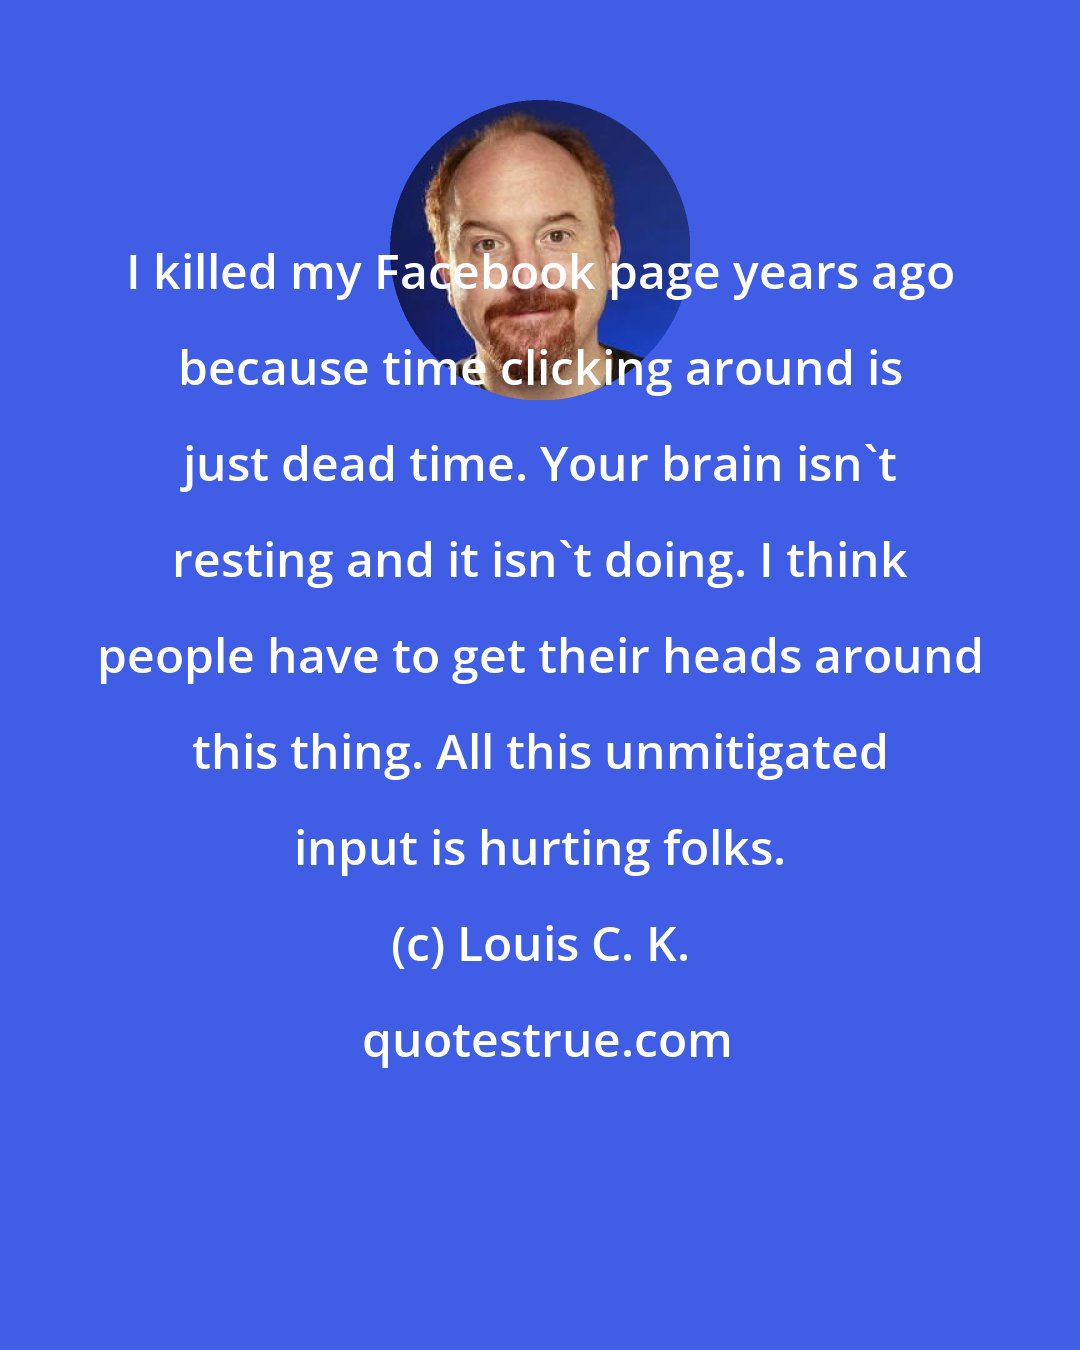 Louis C. K.: I killed my Facebook page years ago because time clicking around is just dead time. Your brain isn't resting and it isn't doing. I think people have to get their heads around this thing. All this unmitigated input is hurting folks.